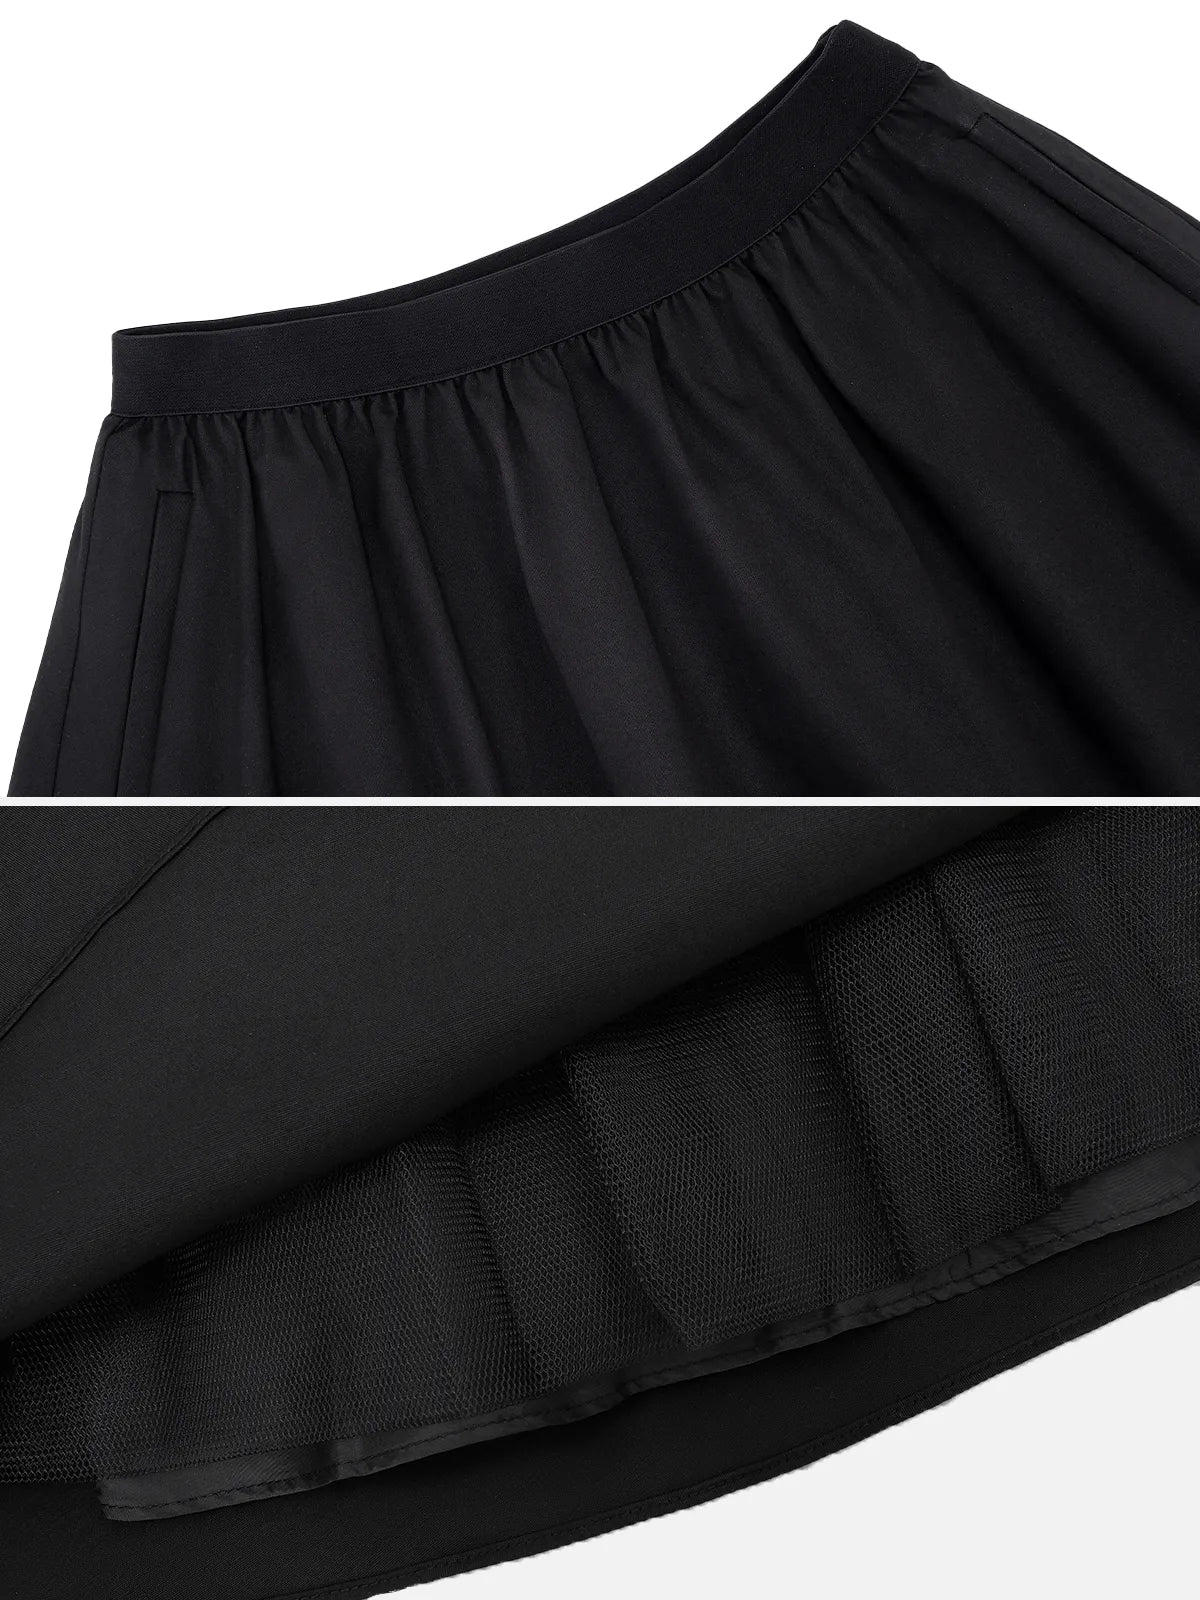 Women&#39;s black skirt with a tasteful mid-length design, combining modest coverage and stylish allure